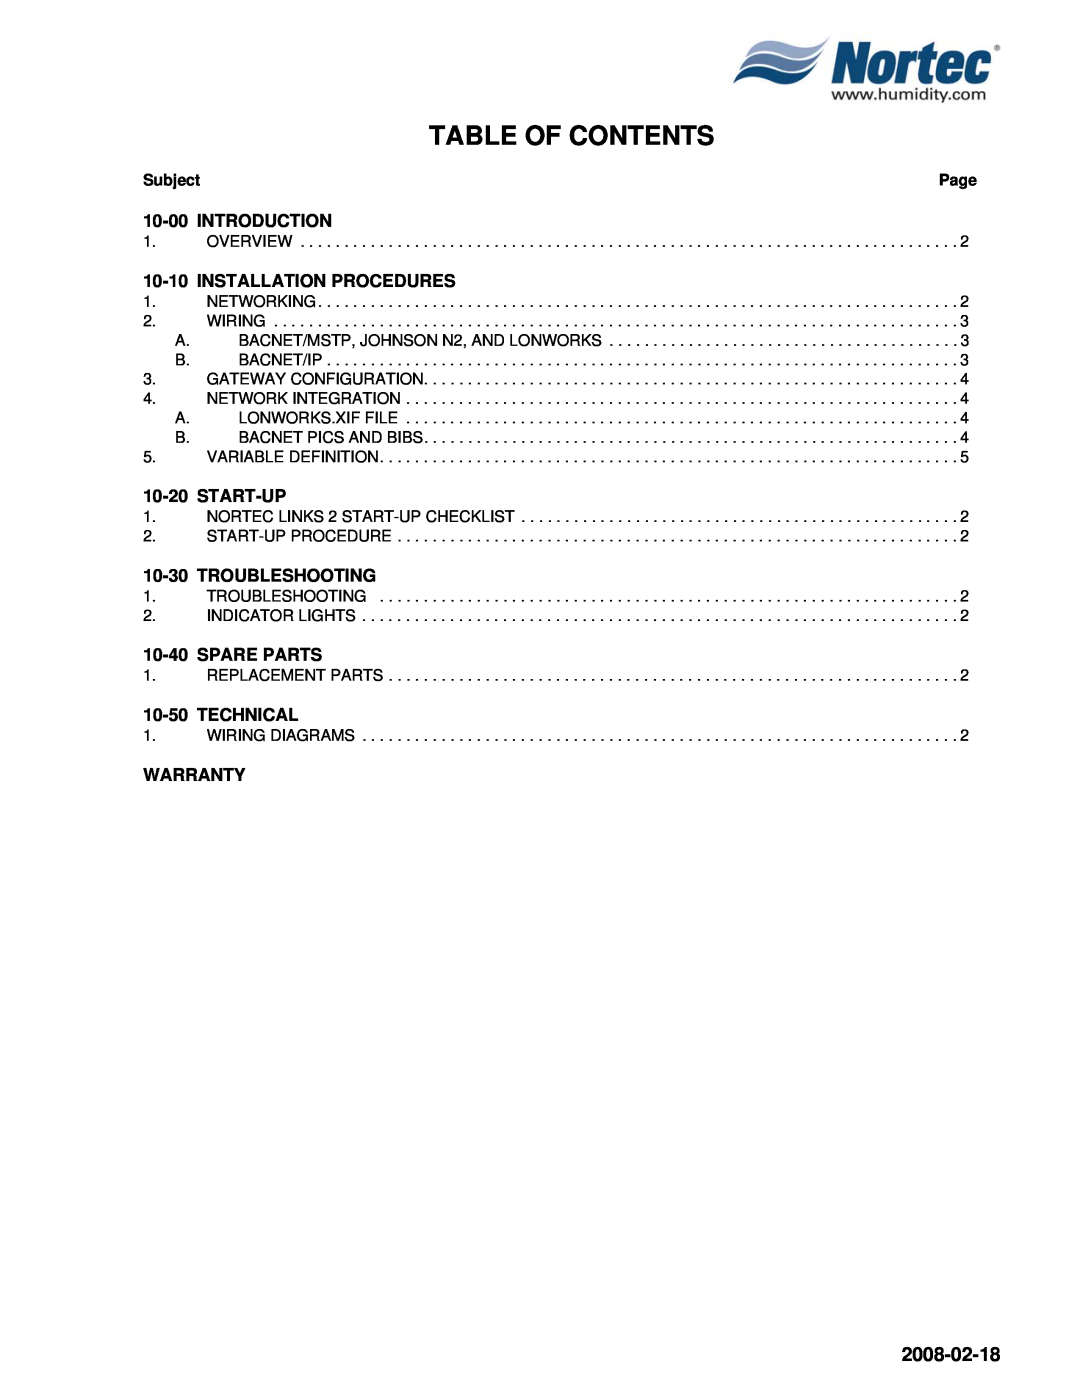 Nortec Industries NHTC Series Table Of Contents, 2008-02-18, 10-00INTRODUCTION, 10-10INSTALLATION PROCEDURES, Start-Up 